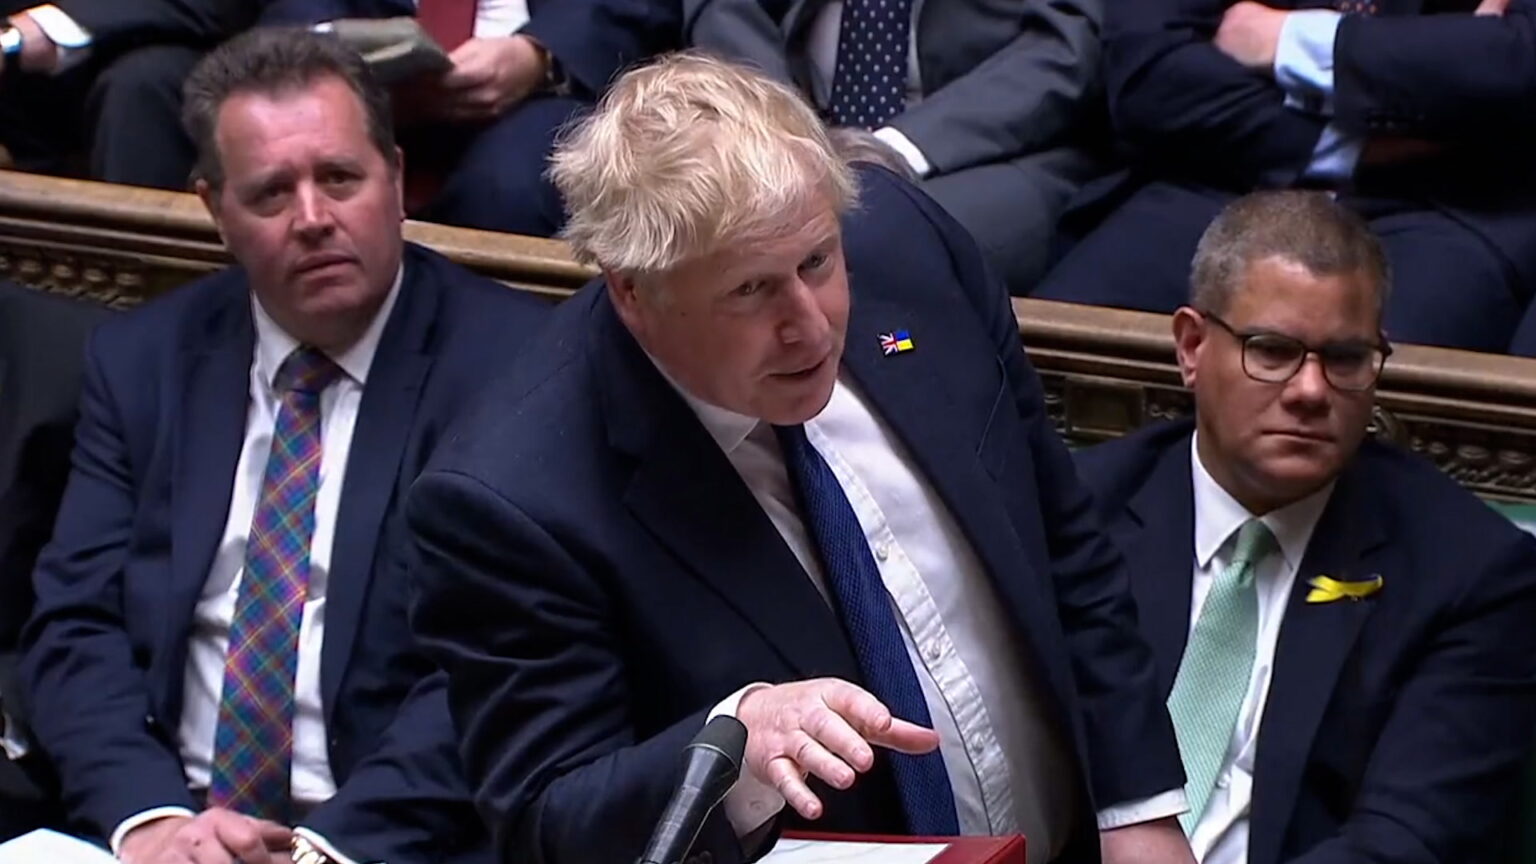 Boris Johnson doubles down on Archbishop of Canterbury attack & says Rwanda policy is ‘morally right’